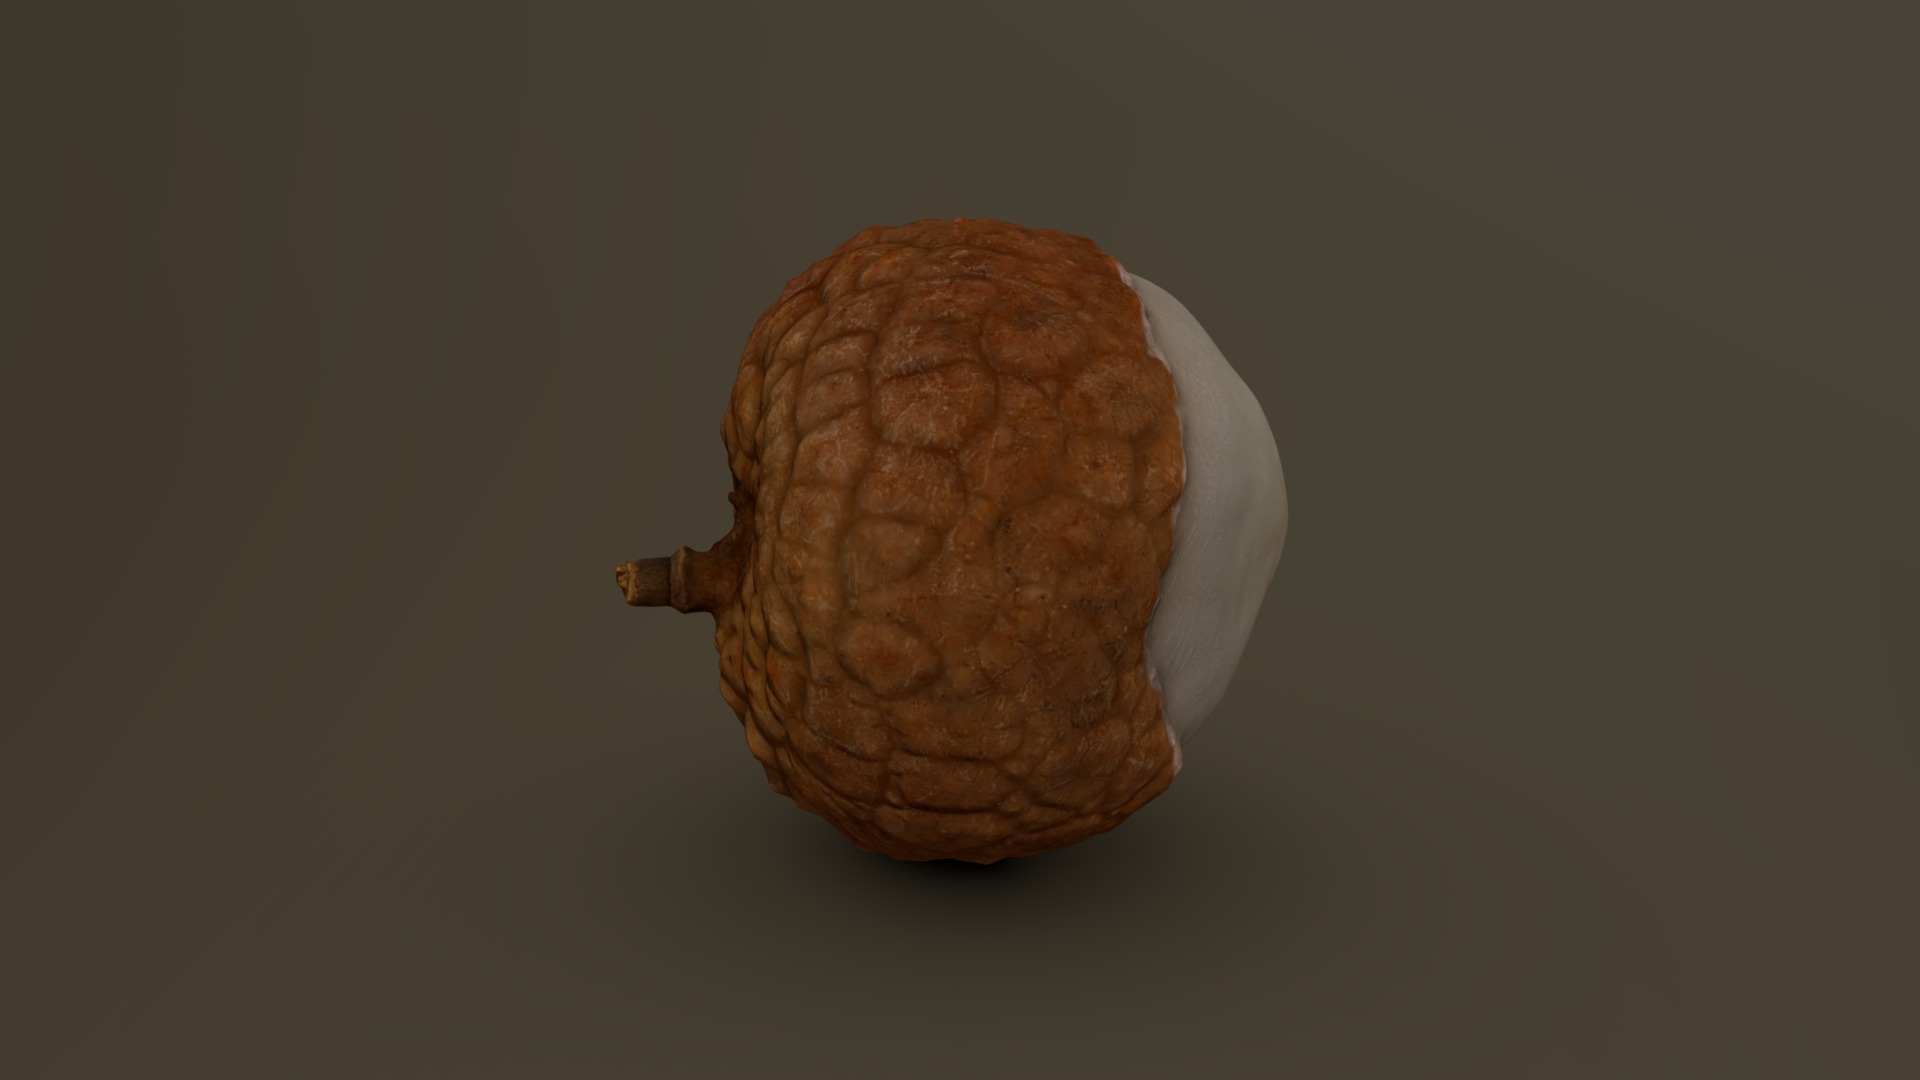 3D model Partially Peeled Lychee 07 - This is a 3D model of the Partially Peeled Lychee 07. The 3D model is about a brown mushroom on a grey background.